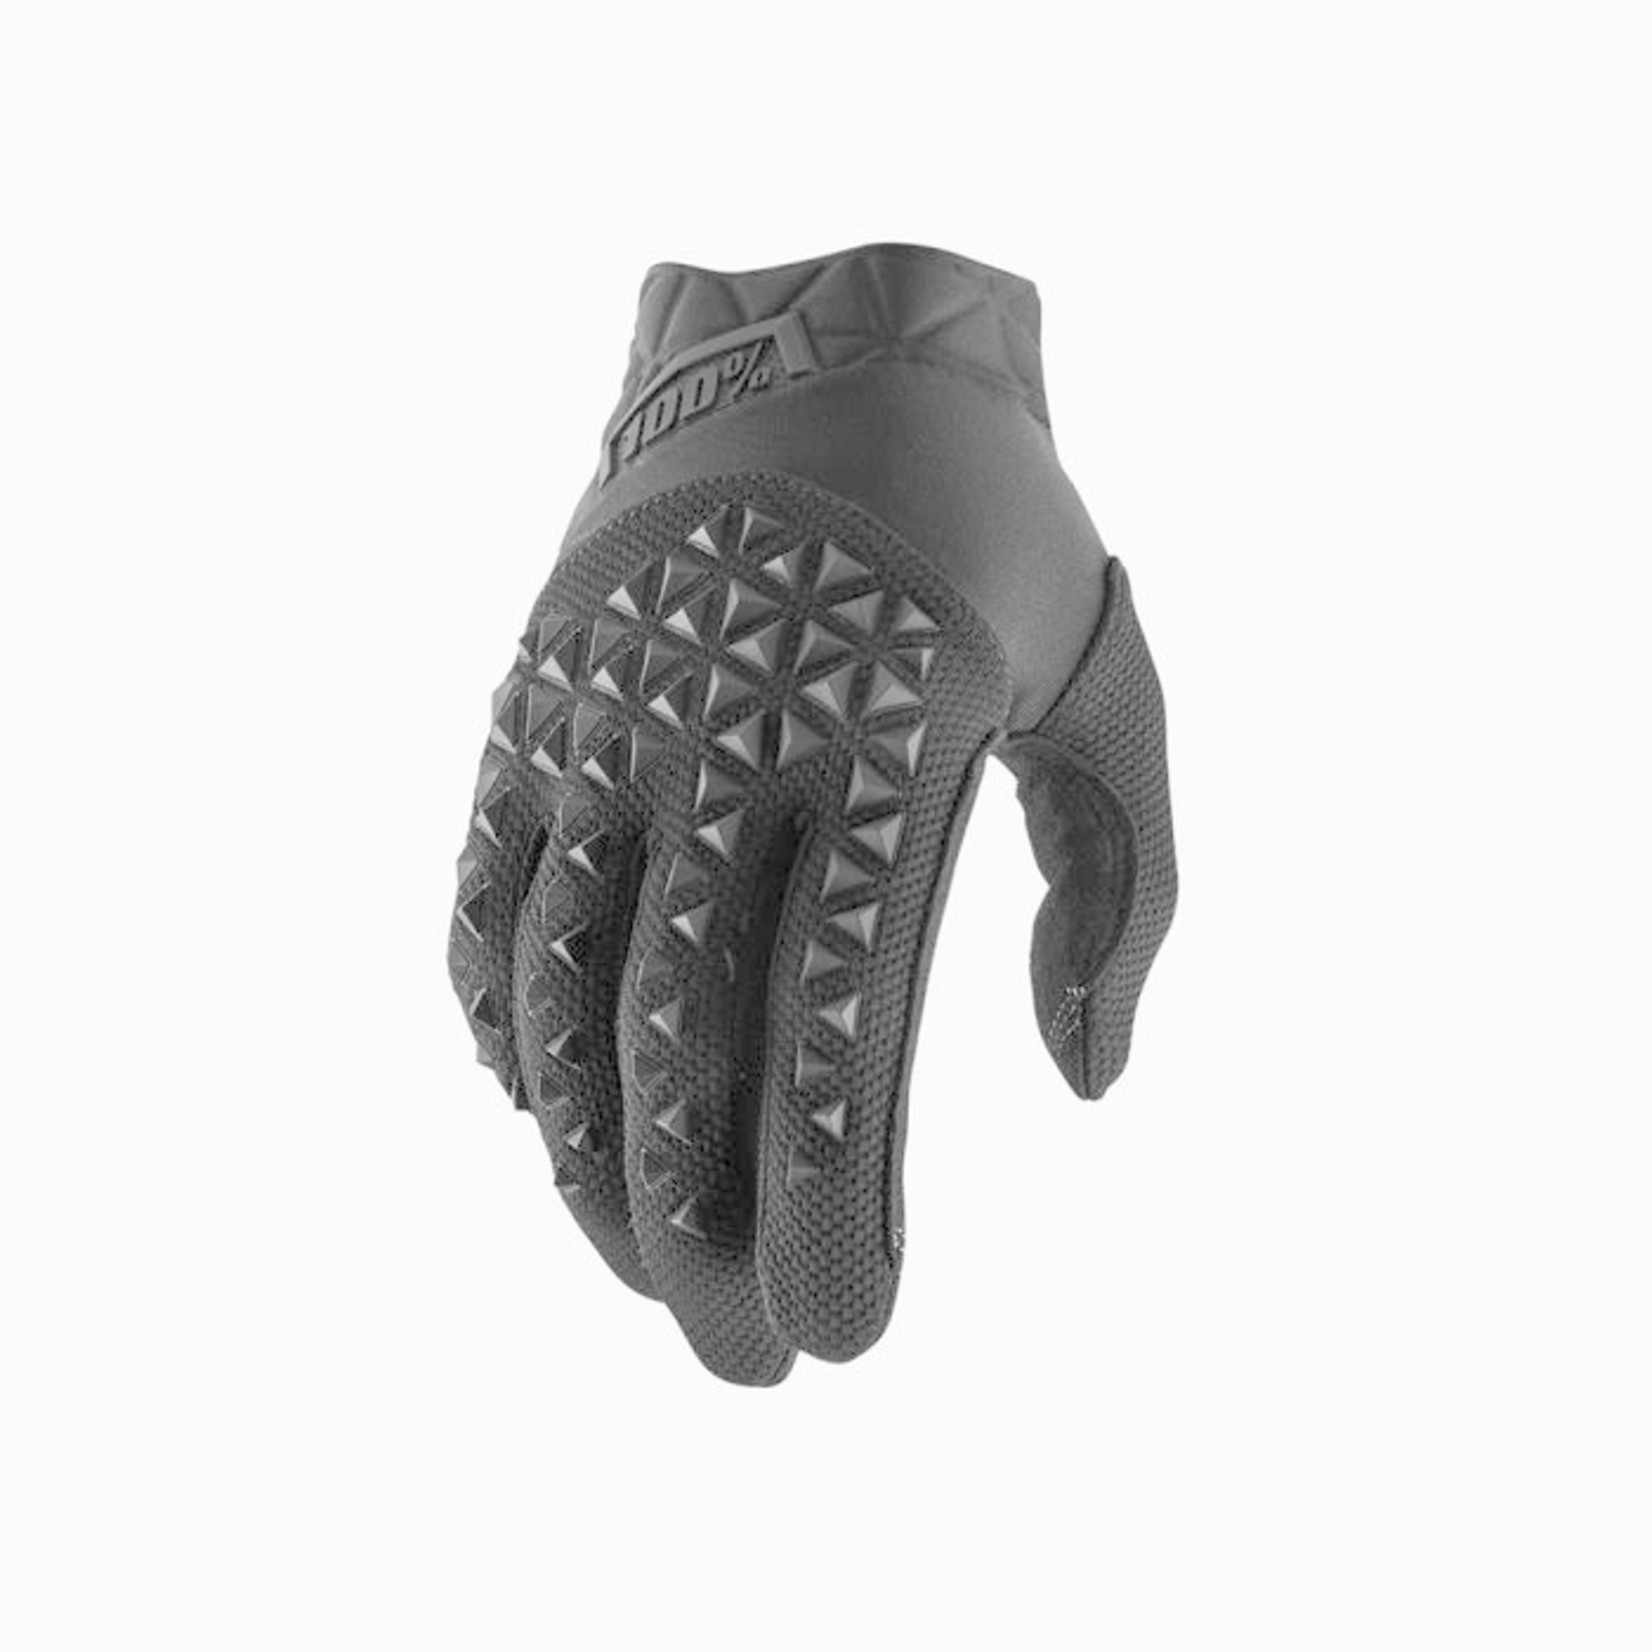 100% AIRMATIC Bike/Cycling Adjustable TPR Glove - Black/Charcoal Youth